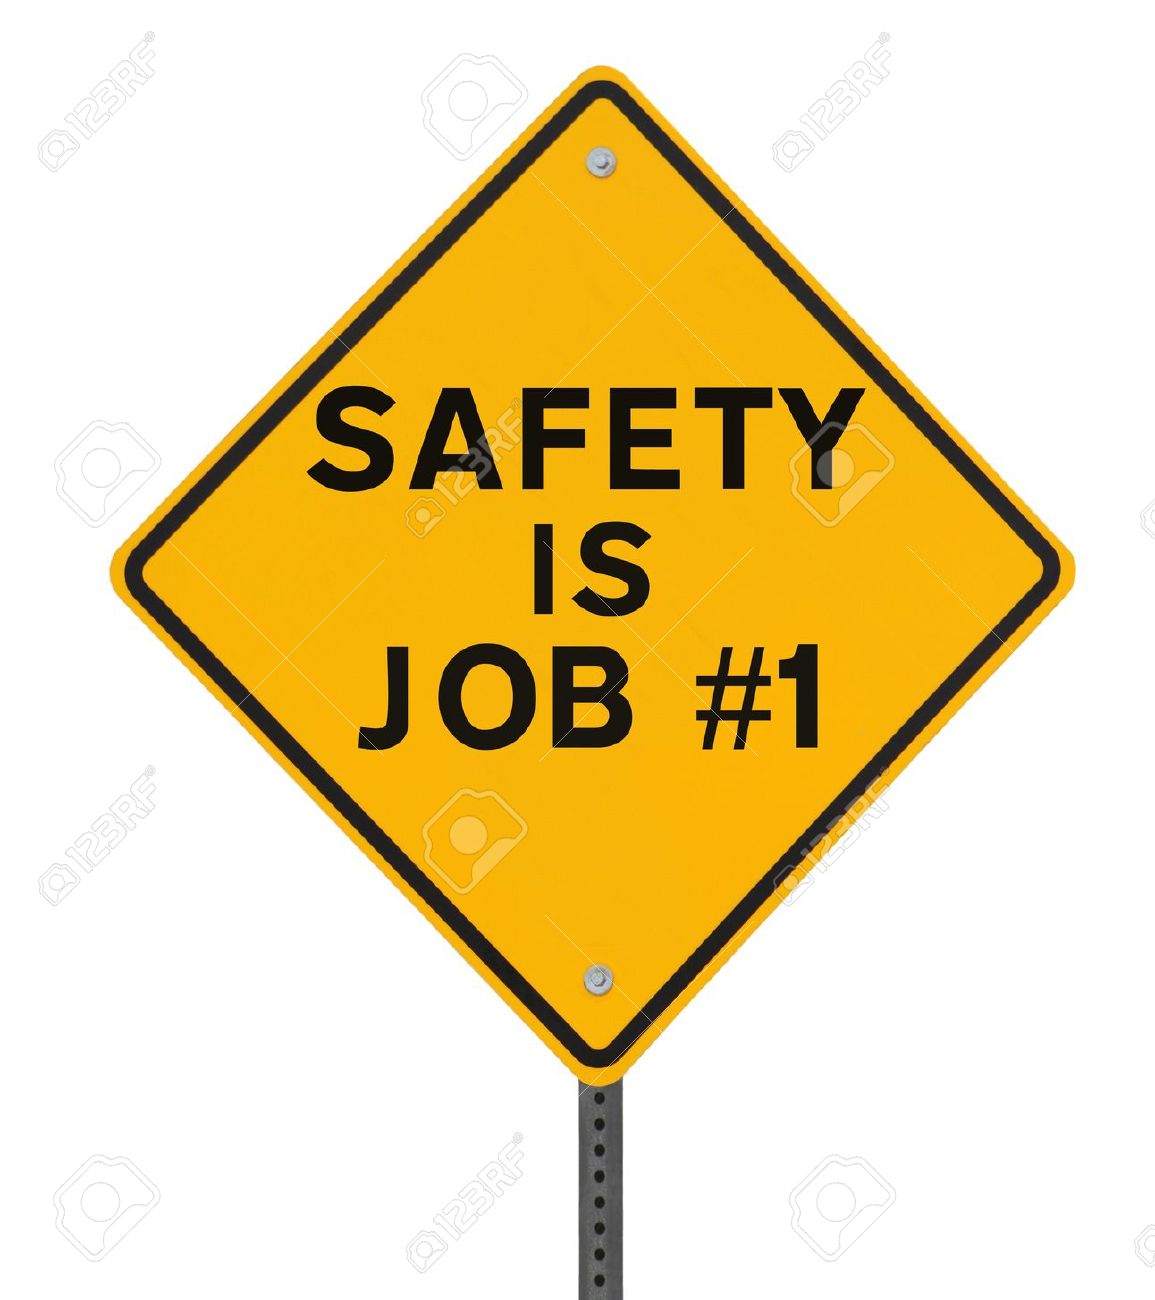 Work Safety Clipart #1 - Safety Clipart